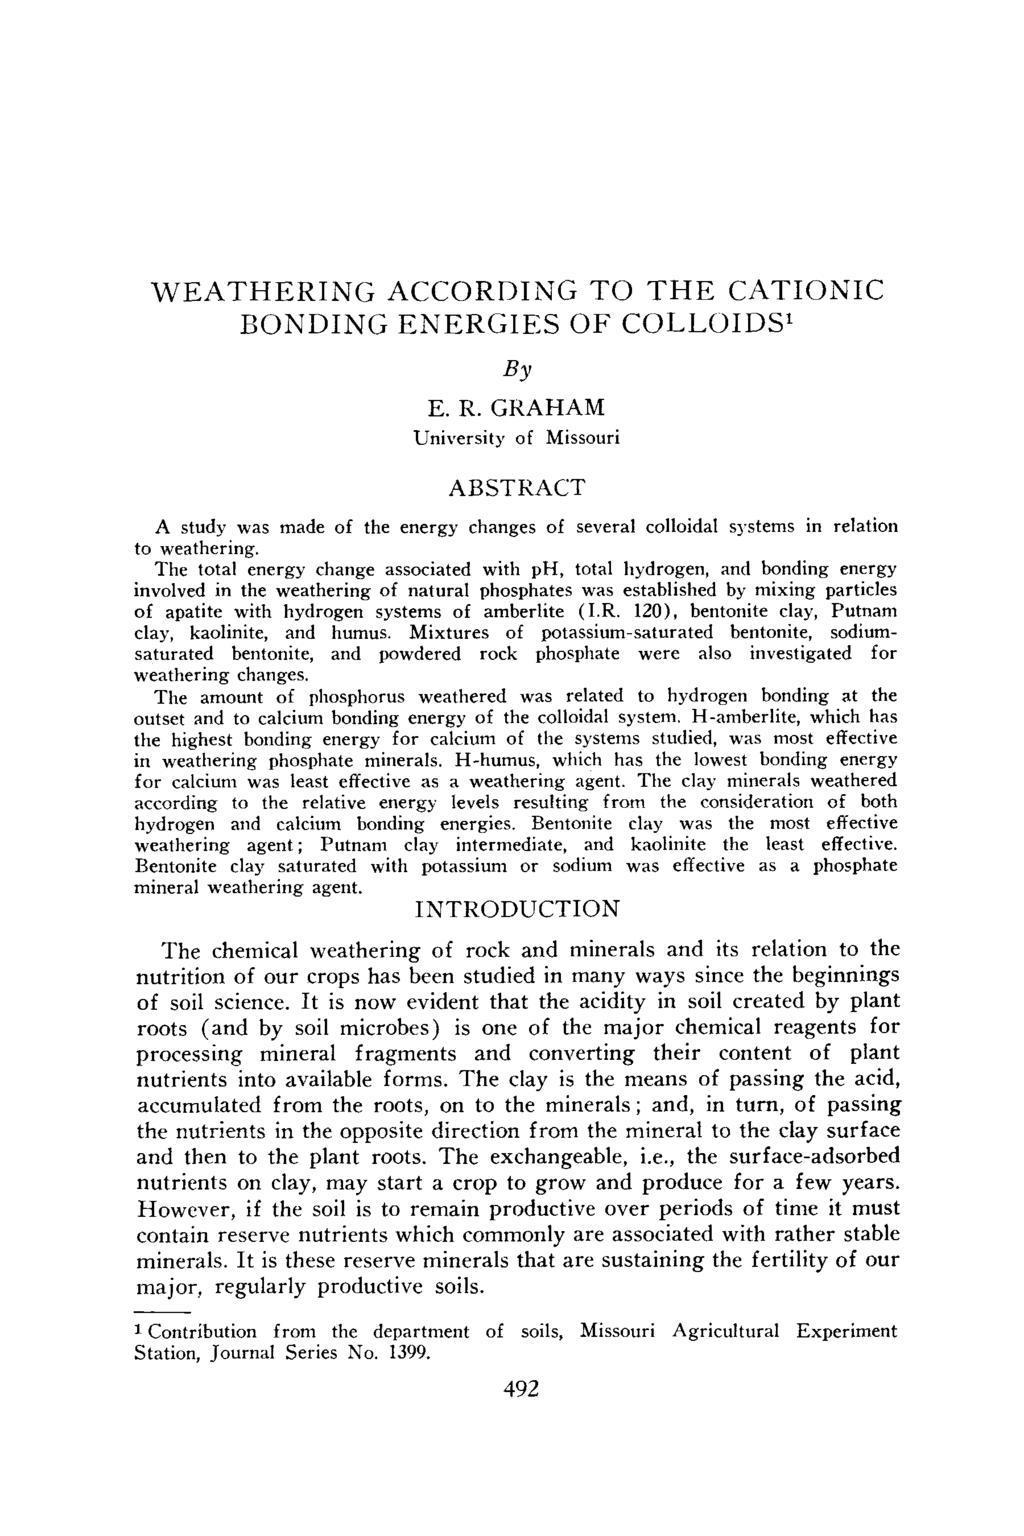 WEATHERING ACCORDING TO THE CATIONIC BONDING ENERGIES OF COLLOIDS I By E. R.